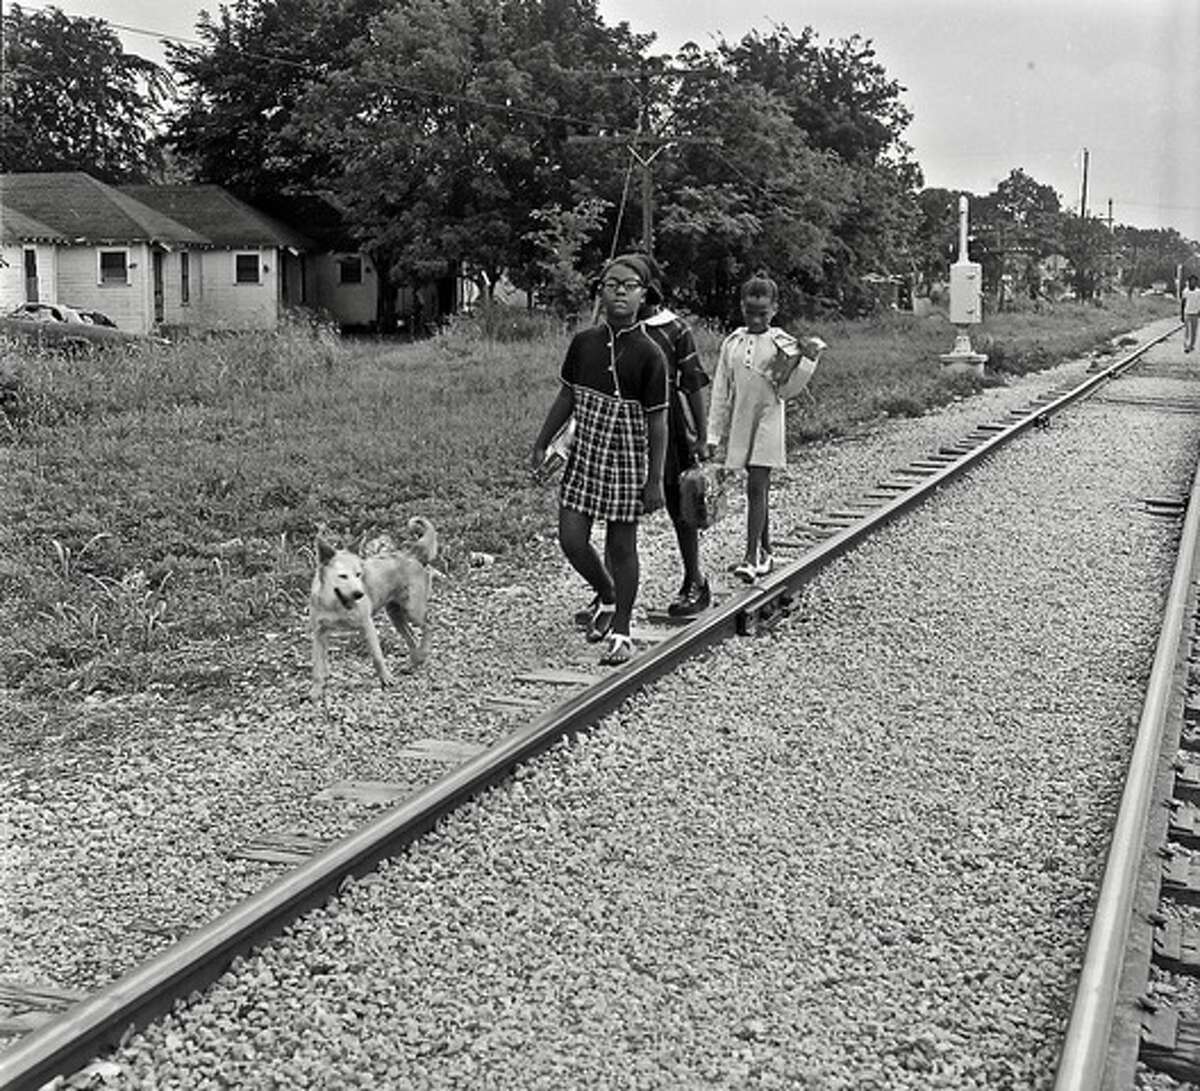 The Columbia Tap Bike Trail, which travels through Third Ward, holds a deep history. Formerly called the Brazoria Railroad, or “Sugar Road,” it was built by enslaved Black people from Brazoria plantations. Today, the community struggles to gain funding and support to beautify the trail.This photo was taken in 1973 by acclaimed Houston photographer Earlie Hudnall Jr. 